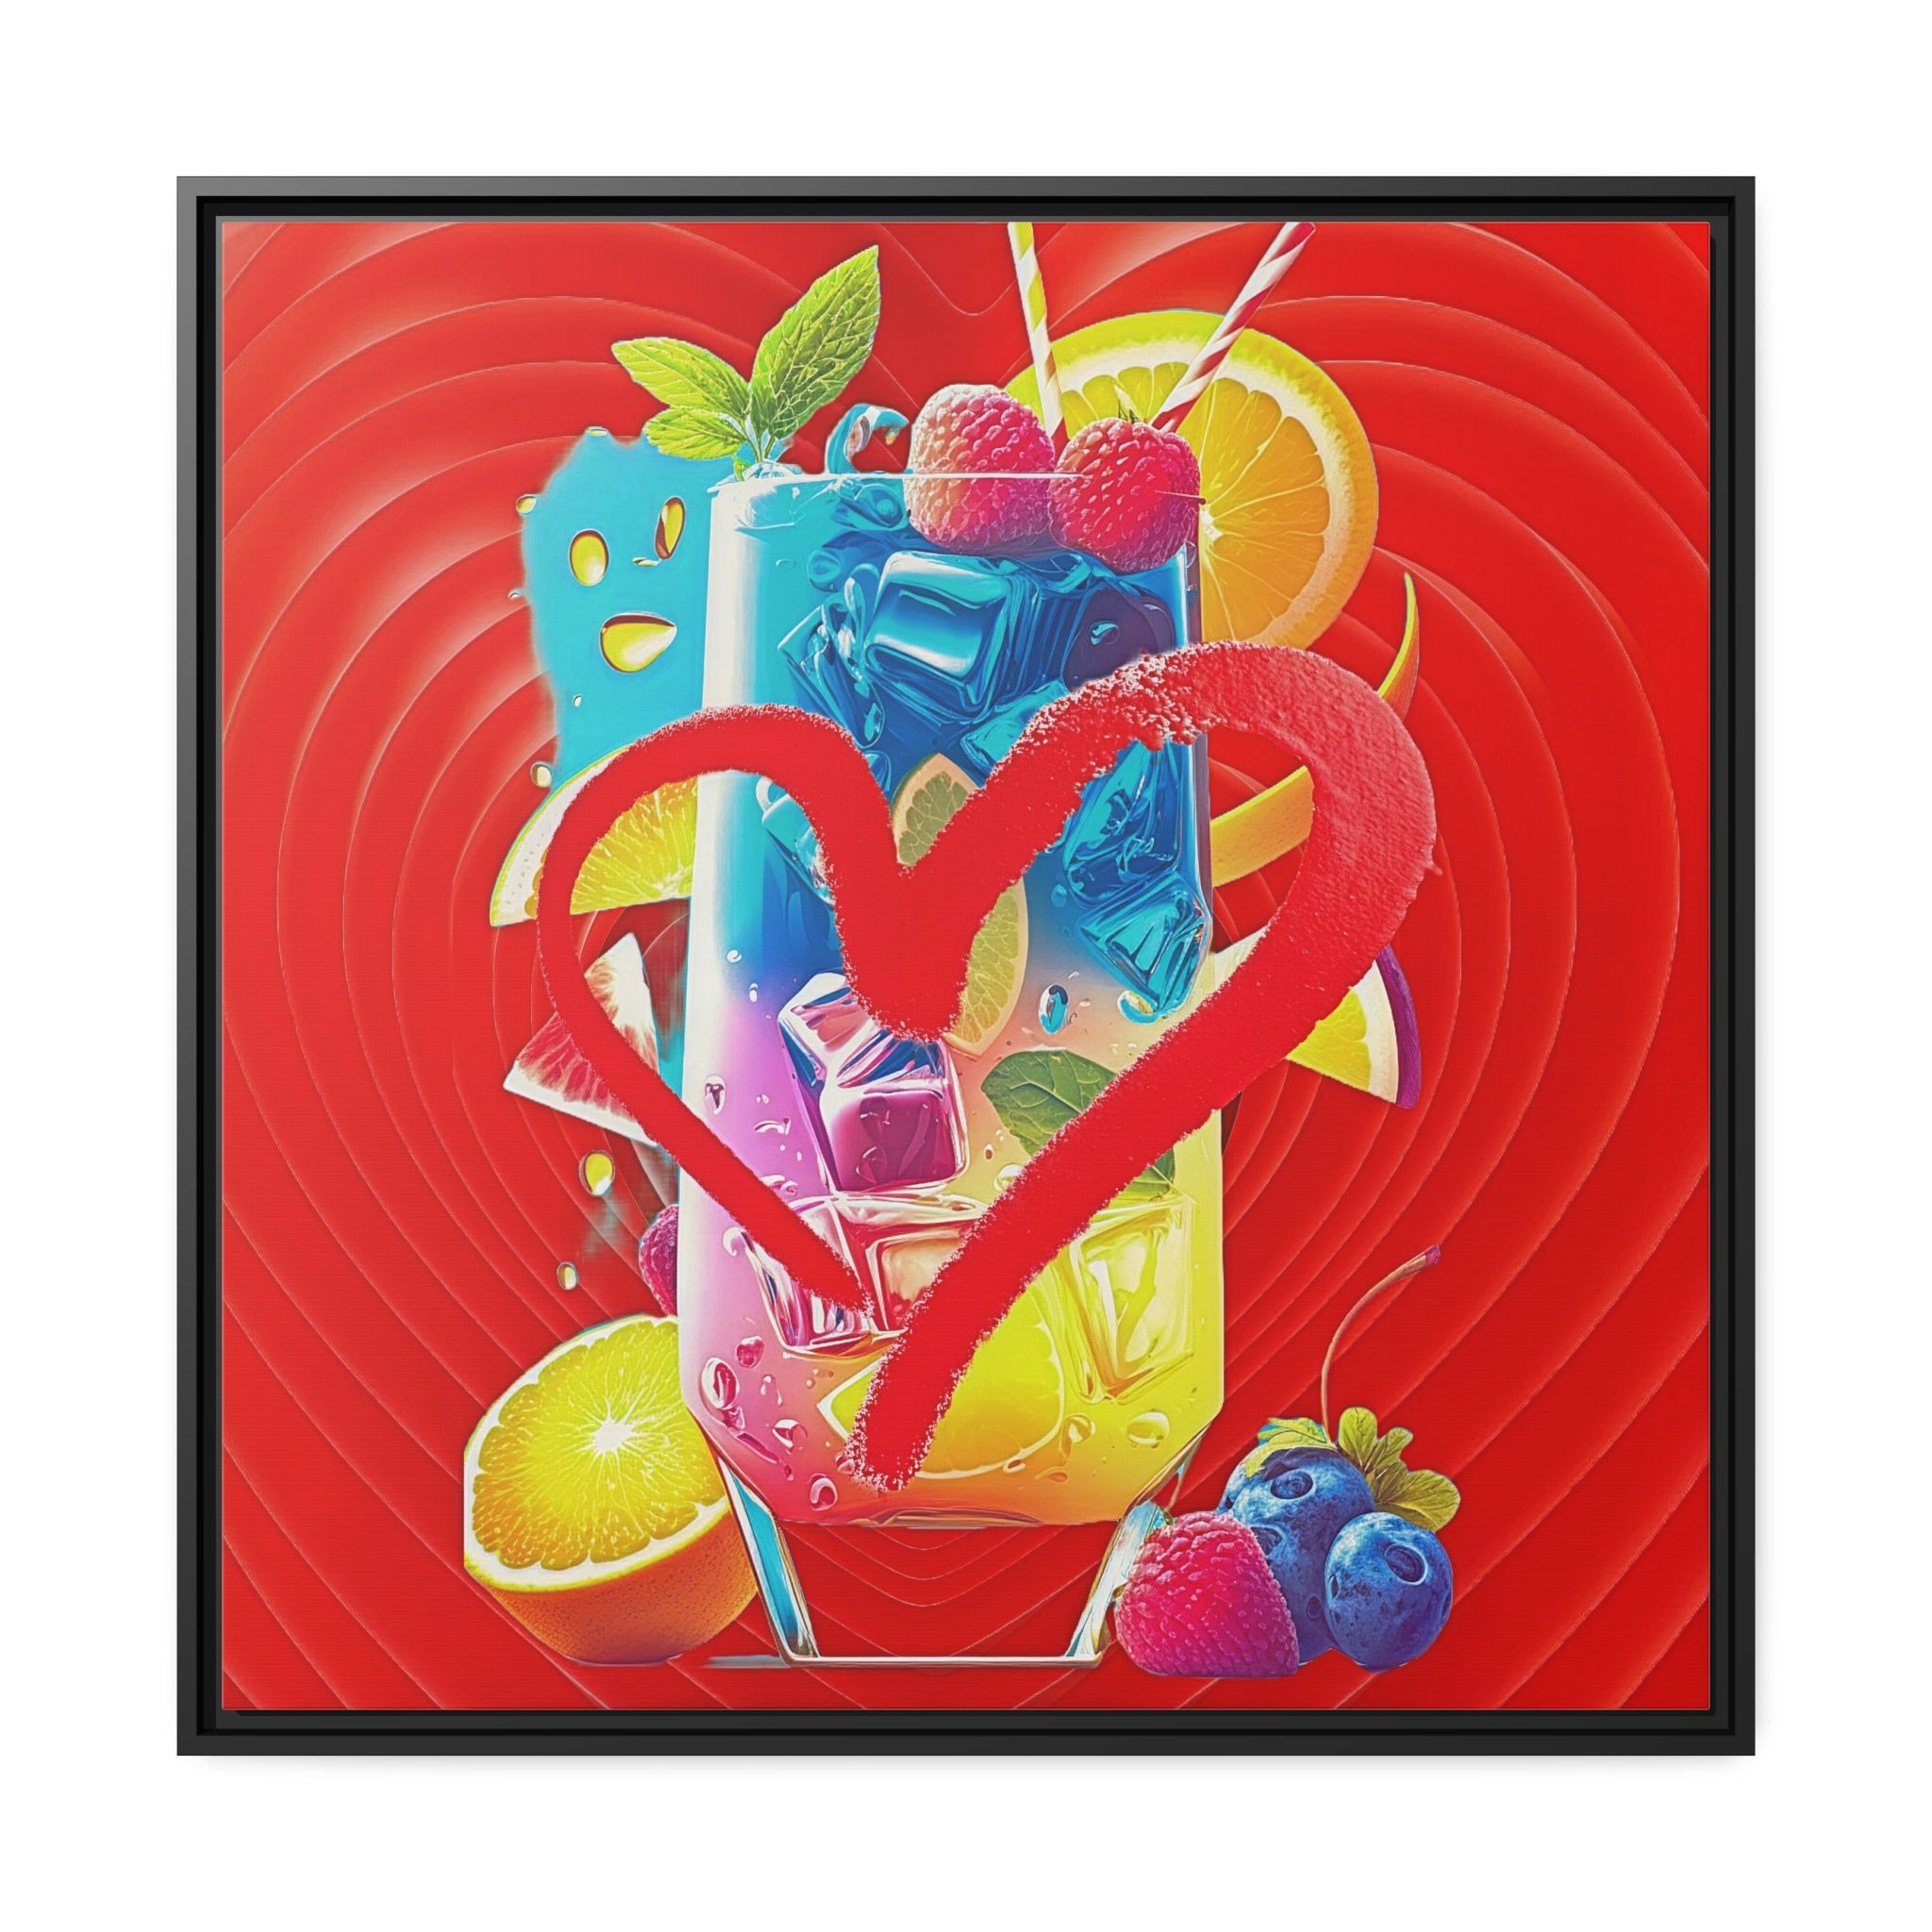 Wall Art LOVE LEMONADE Painting Original Giclee Print Canvas 40X30 + Frame Nice Food, Wine & Drinks Beauty Fun Design Fit Hot House Home Living Gift Ready to Hang